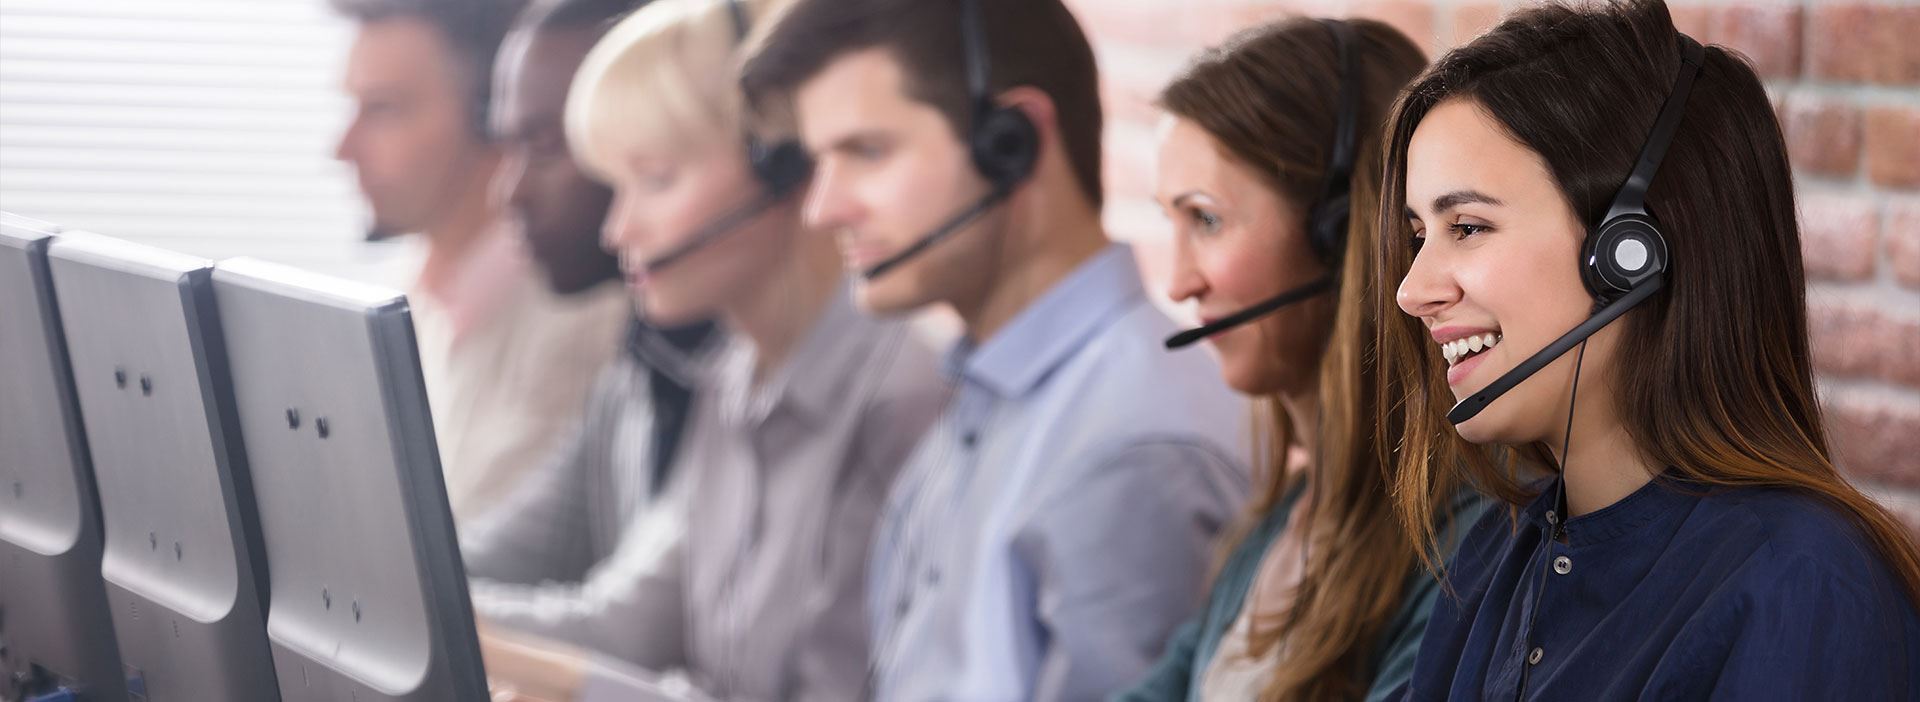 Female customer services agent with headset working in a call center